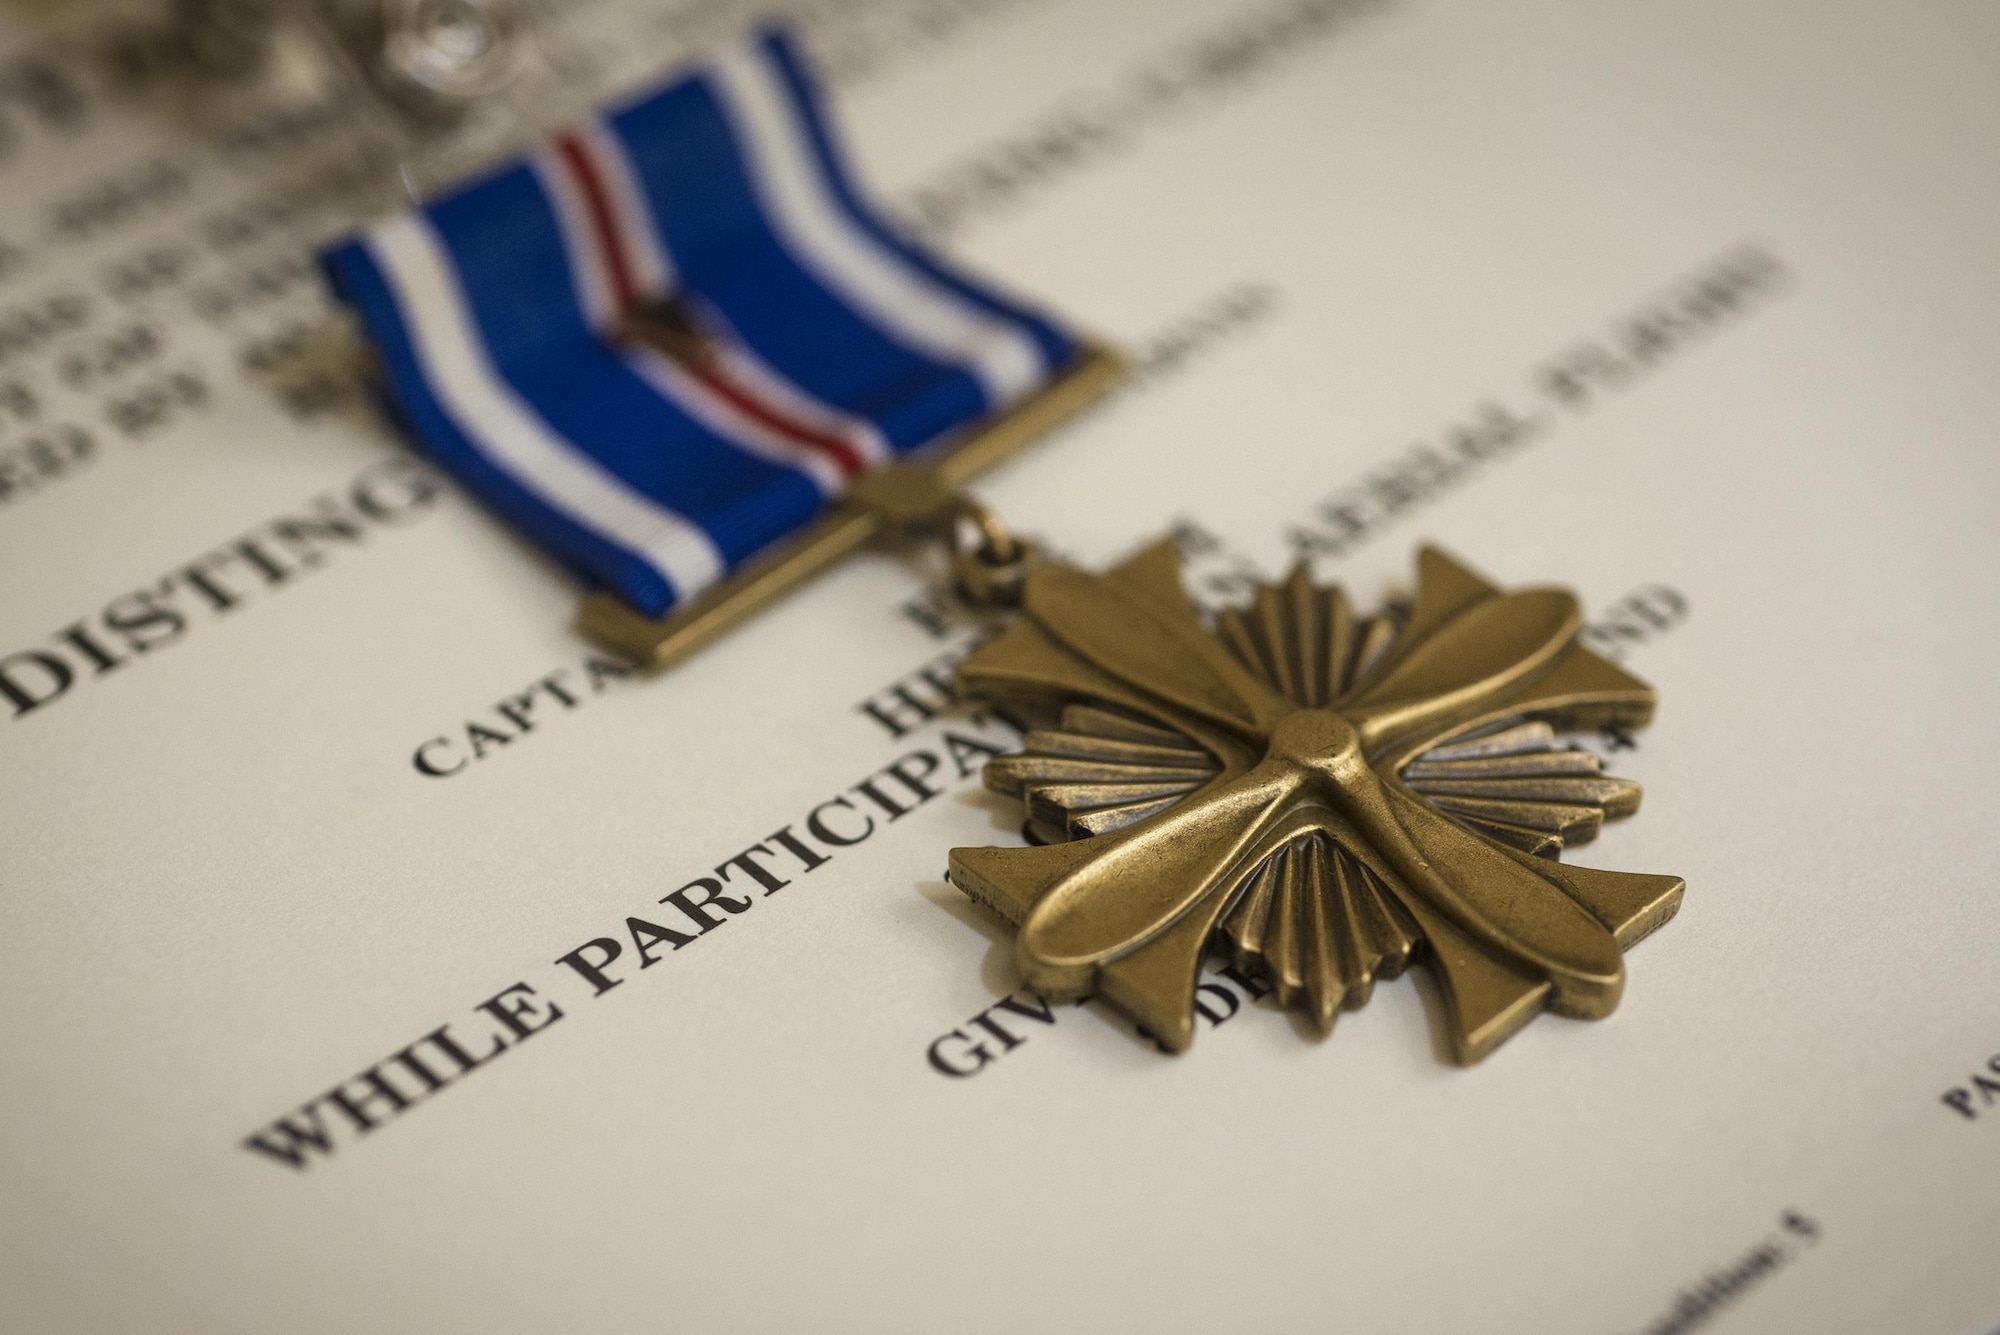 A Distinguished Flying Cross sits on display prior to being awarded to Maj. Jeremiah Parvin Jan. 29, 2015, at Moody Air Force Base, Ga. The DFC is awarded for heroism or extraordinary achievement while participating in an aerial flight. Parvin is a 75th Fighter Squadron A-10C Thunderbolt II pilot. (U.S. Air Force photo/Senior Airman Ryan Callaghan)